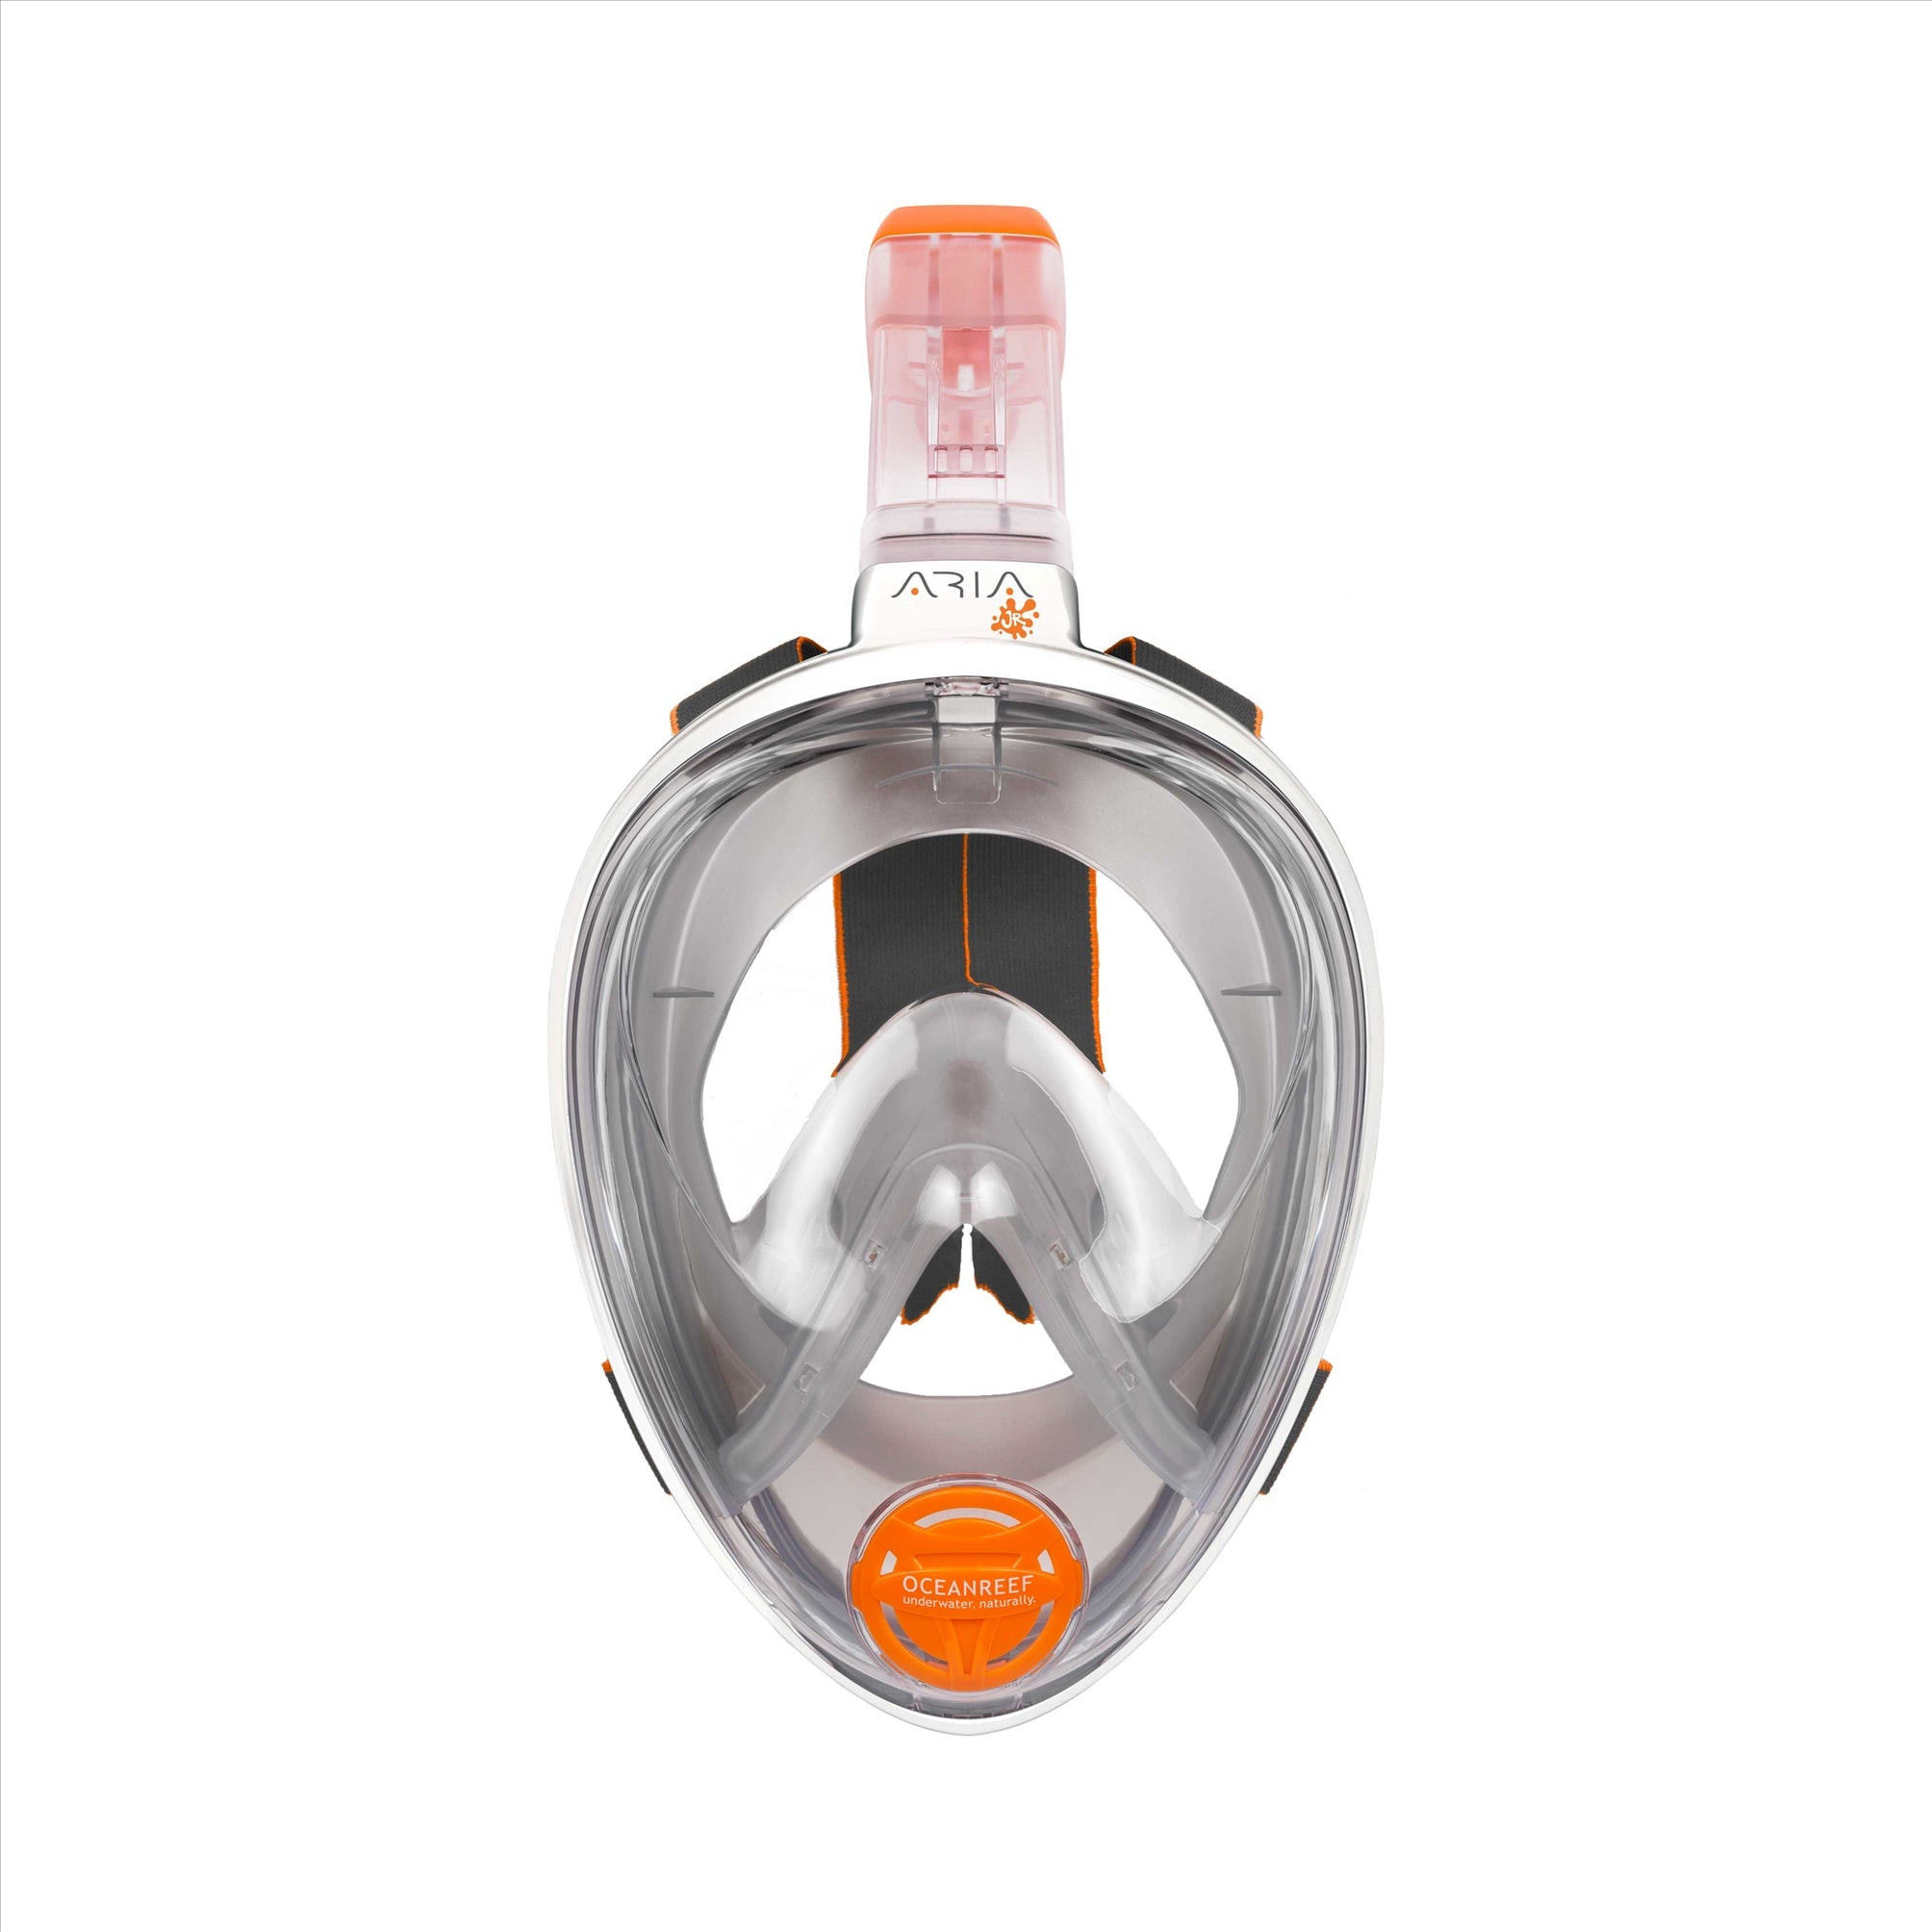 Used Ocean Reef Aria Jr – Full Face Snorkeling Mask White One Size-